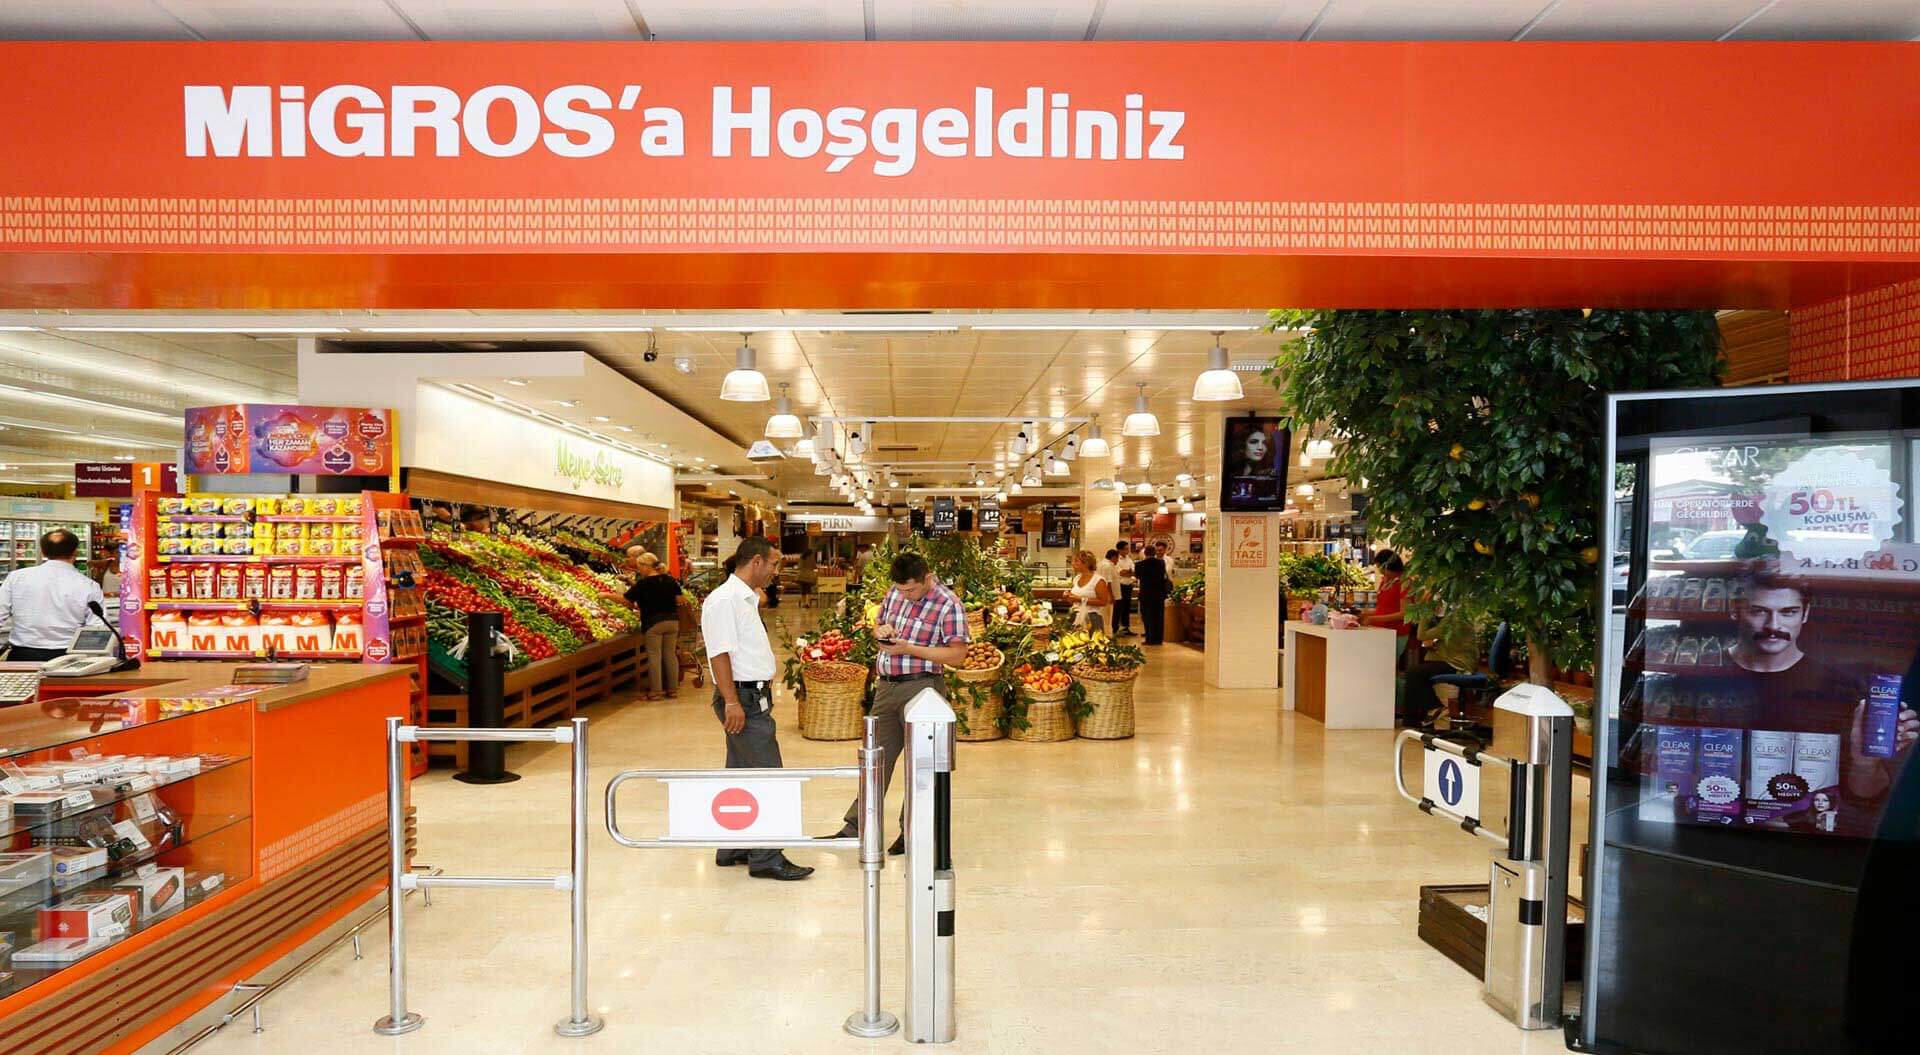 Migros Turkey supermarket entrance area to fresh produce store design and brand communications